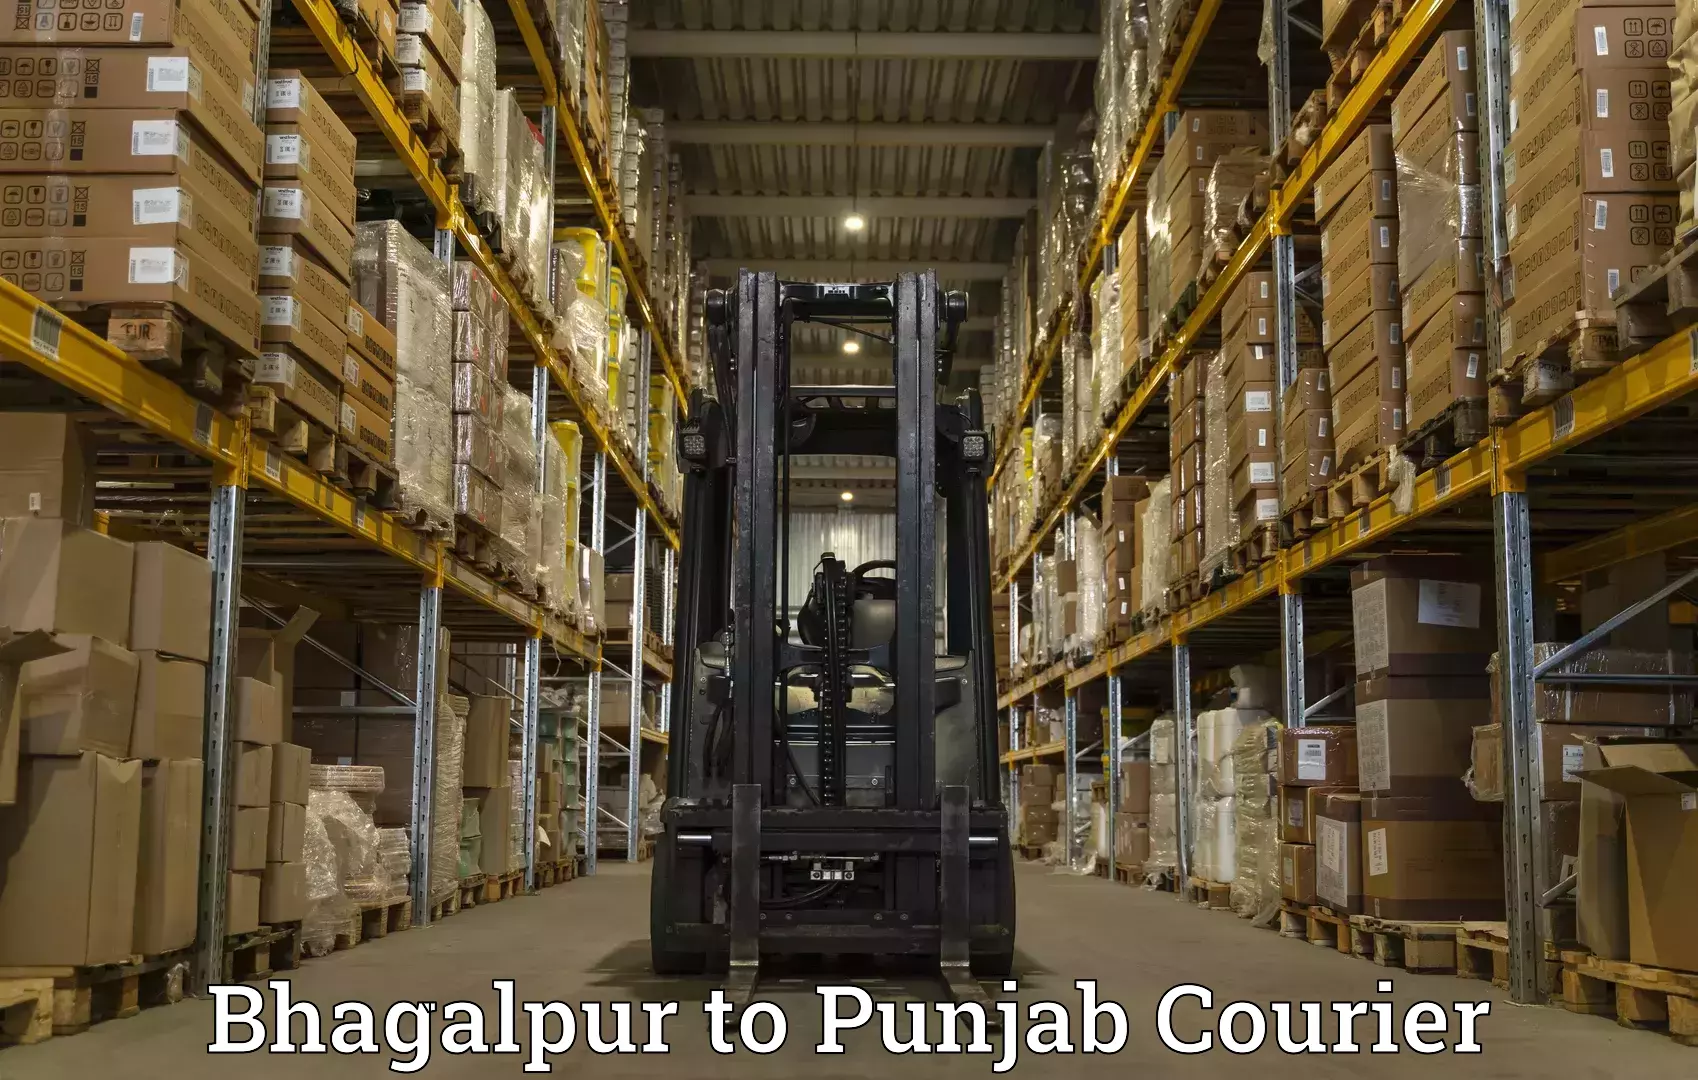 Flexible delivery scheduling Bhagalpur to Malout